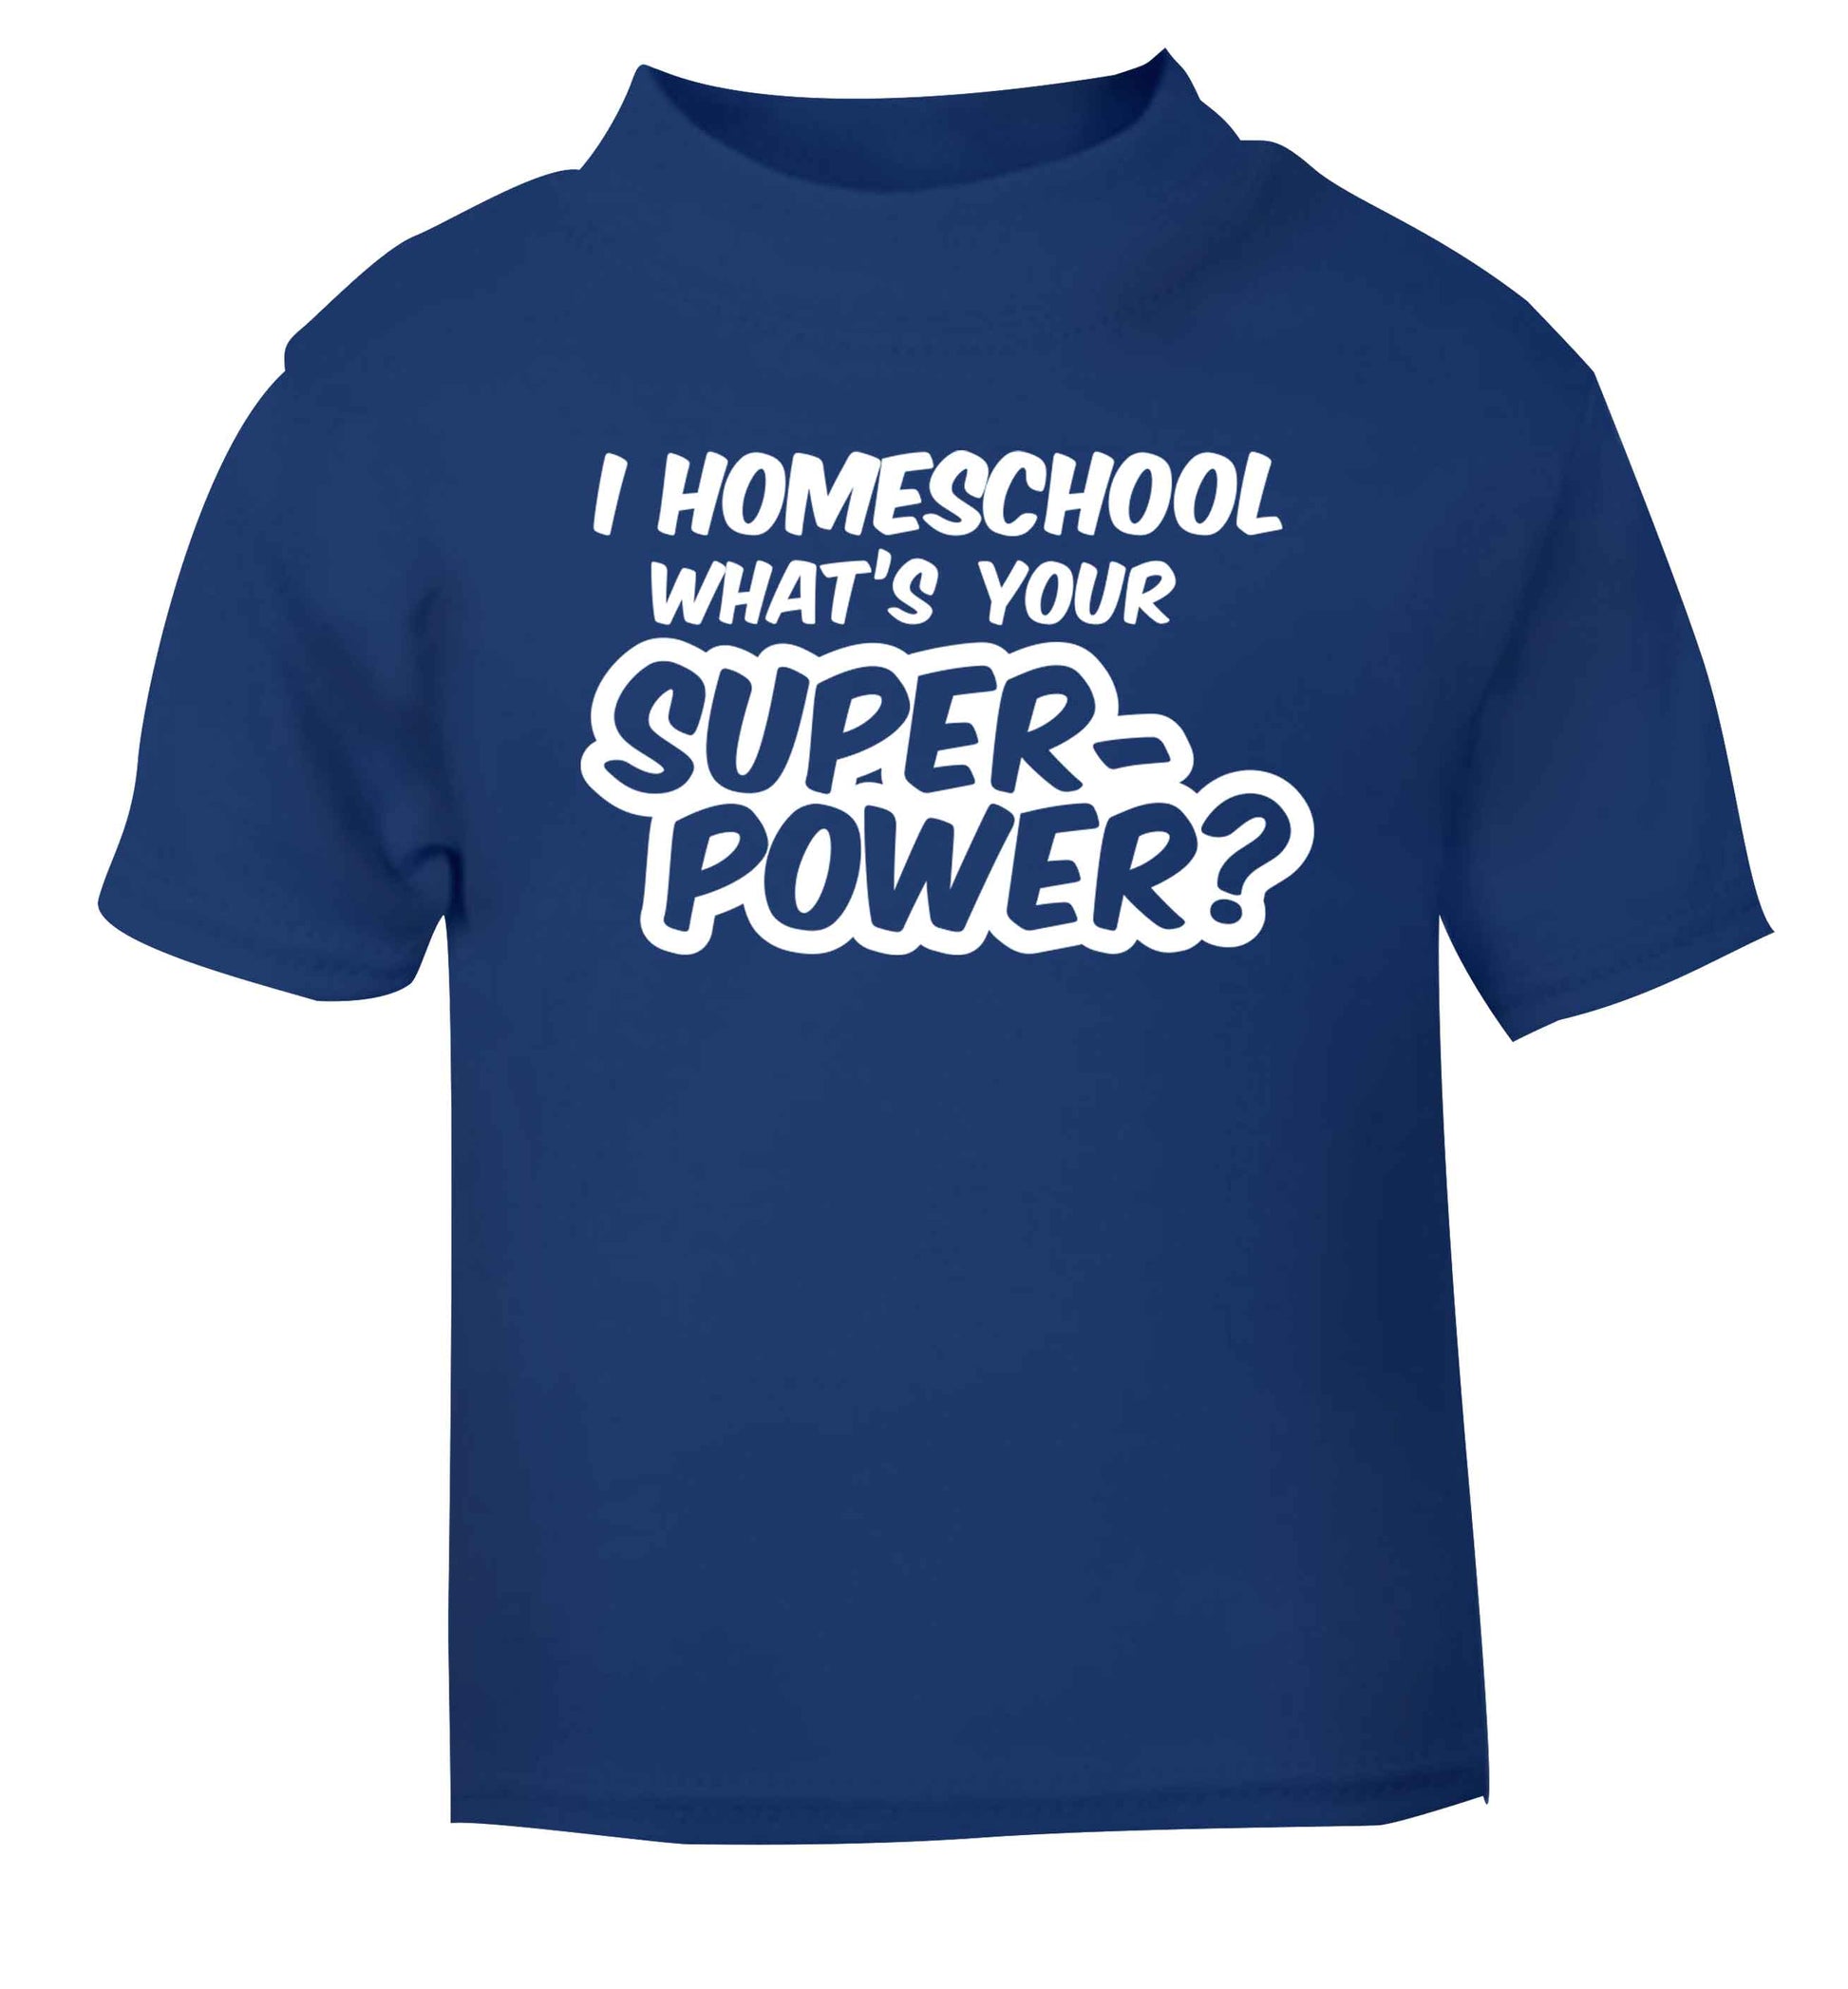 I homeschool what's your superpower? blue Baby Toddler Tshirt 2 Years